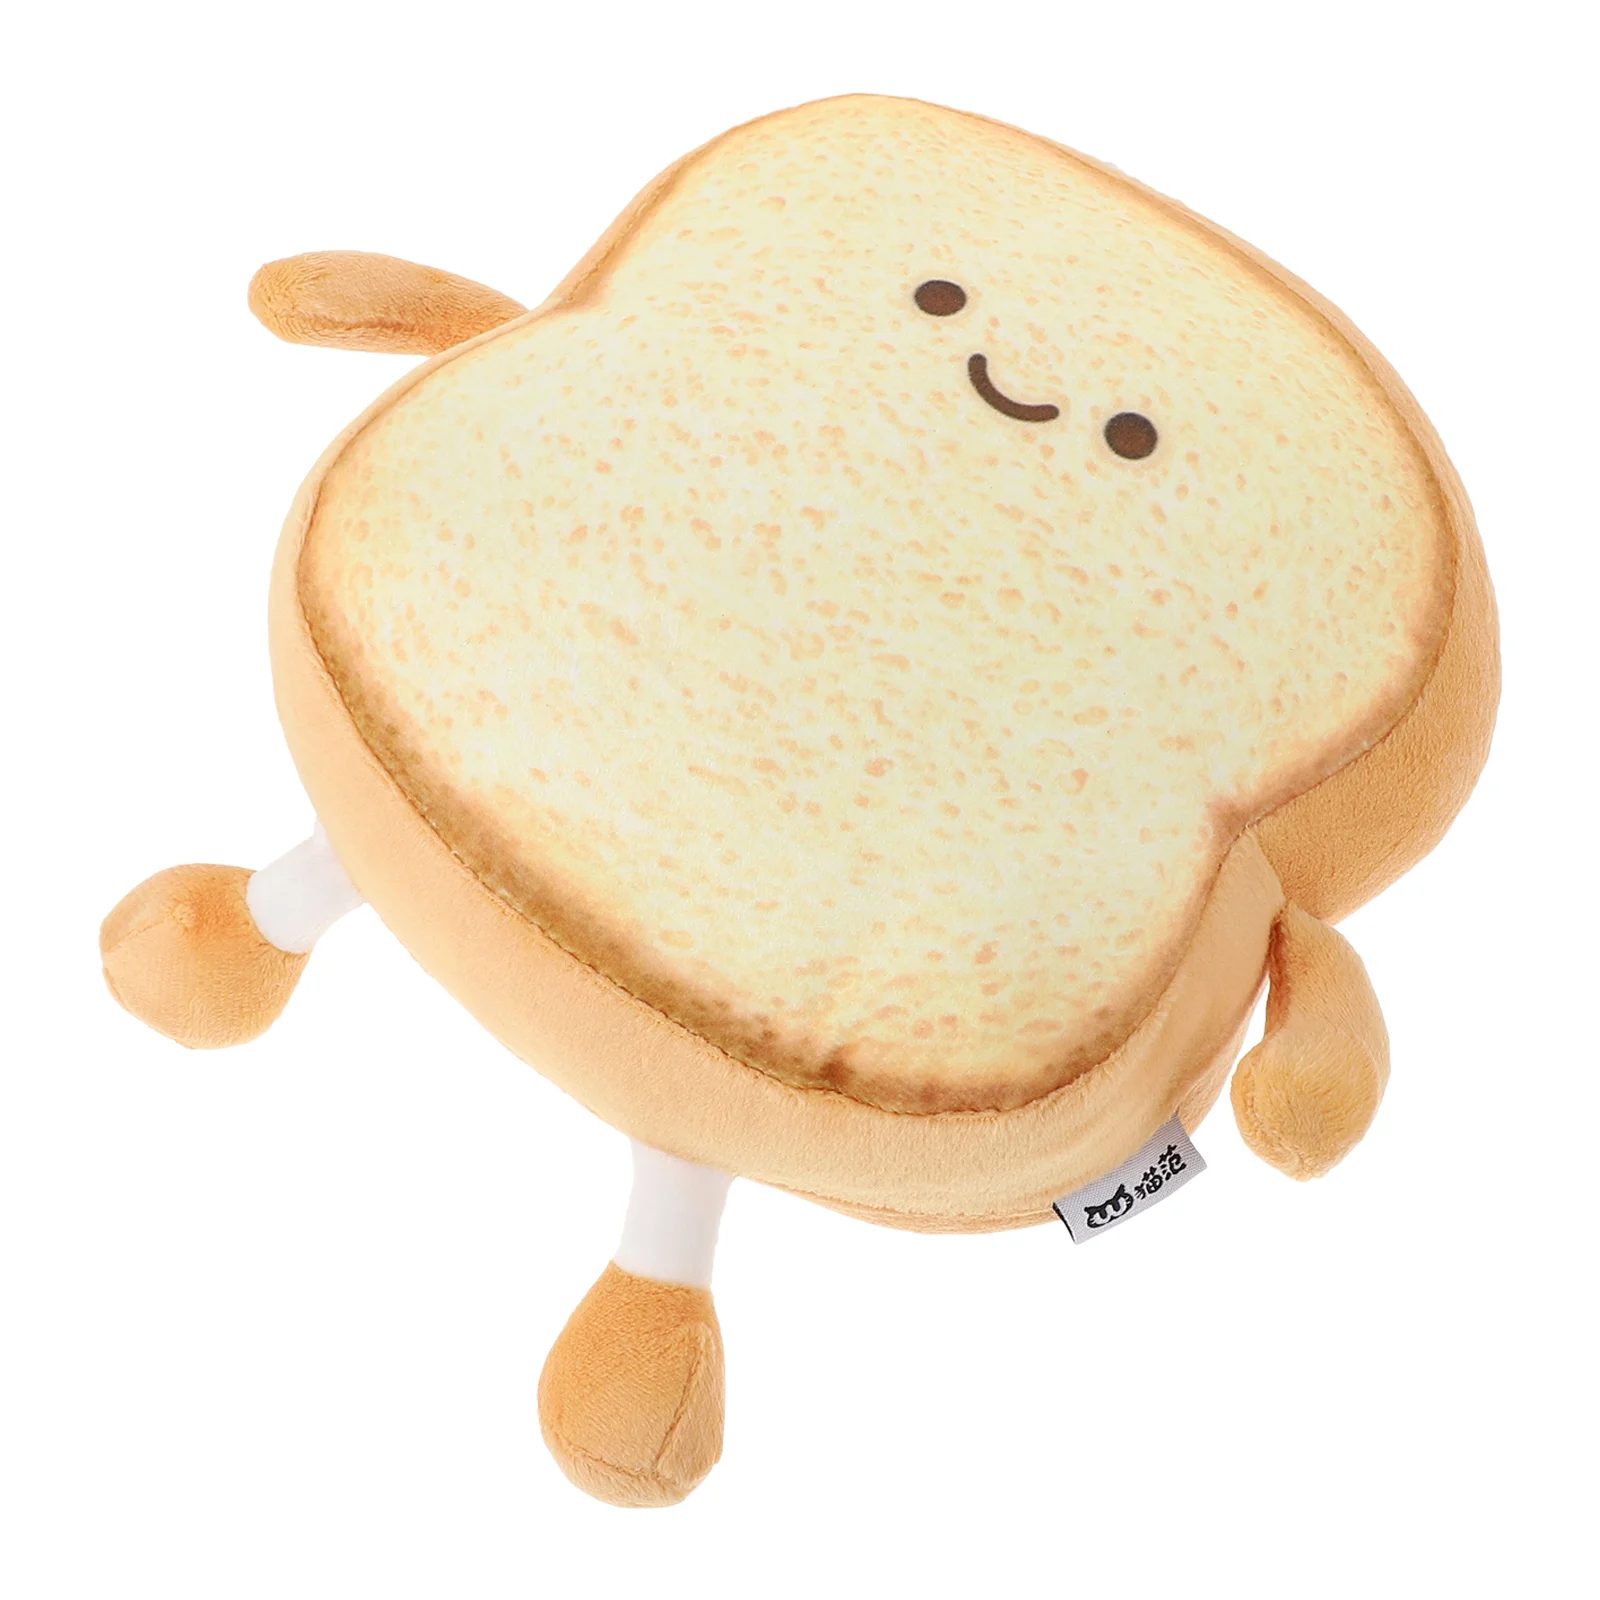 

Bread Pillow Plush Toast Pillows Throw Toy Shape Stuffed Birthday Adorable Present Toys Kids Loaf Shaped Cushion Funny Sliced